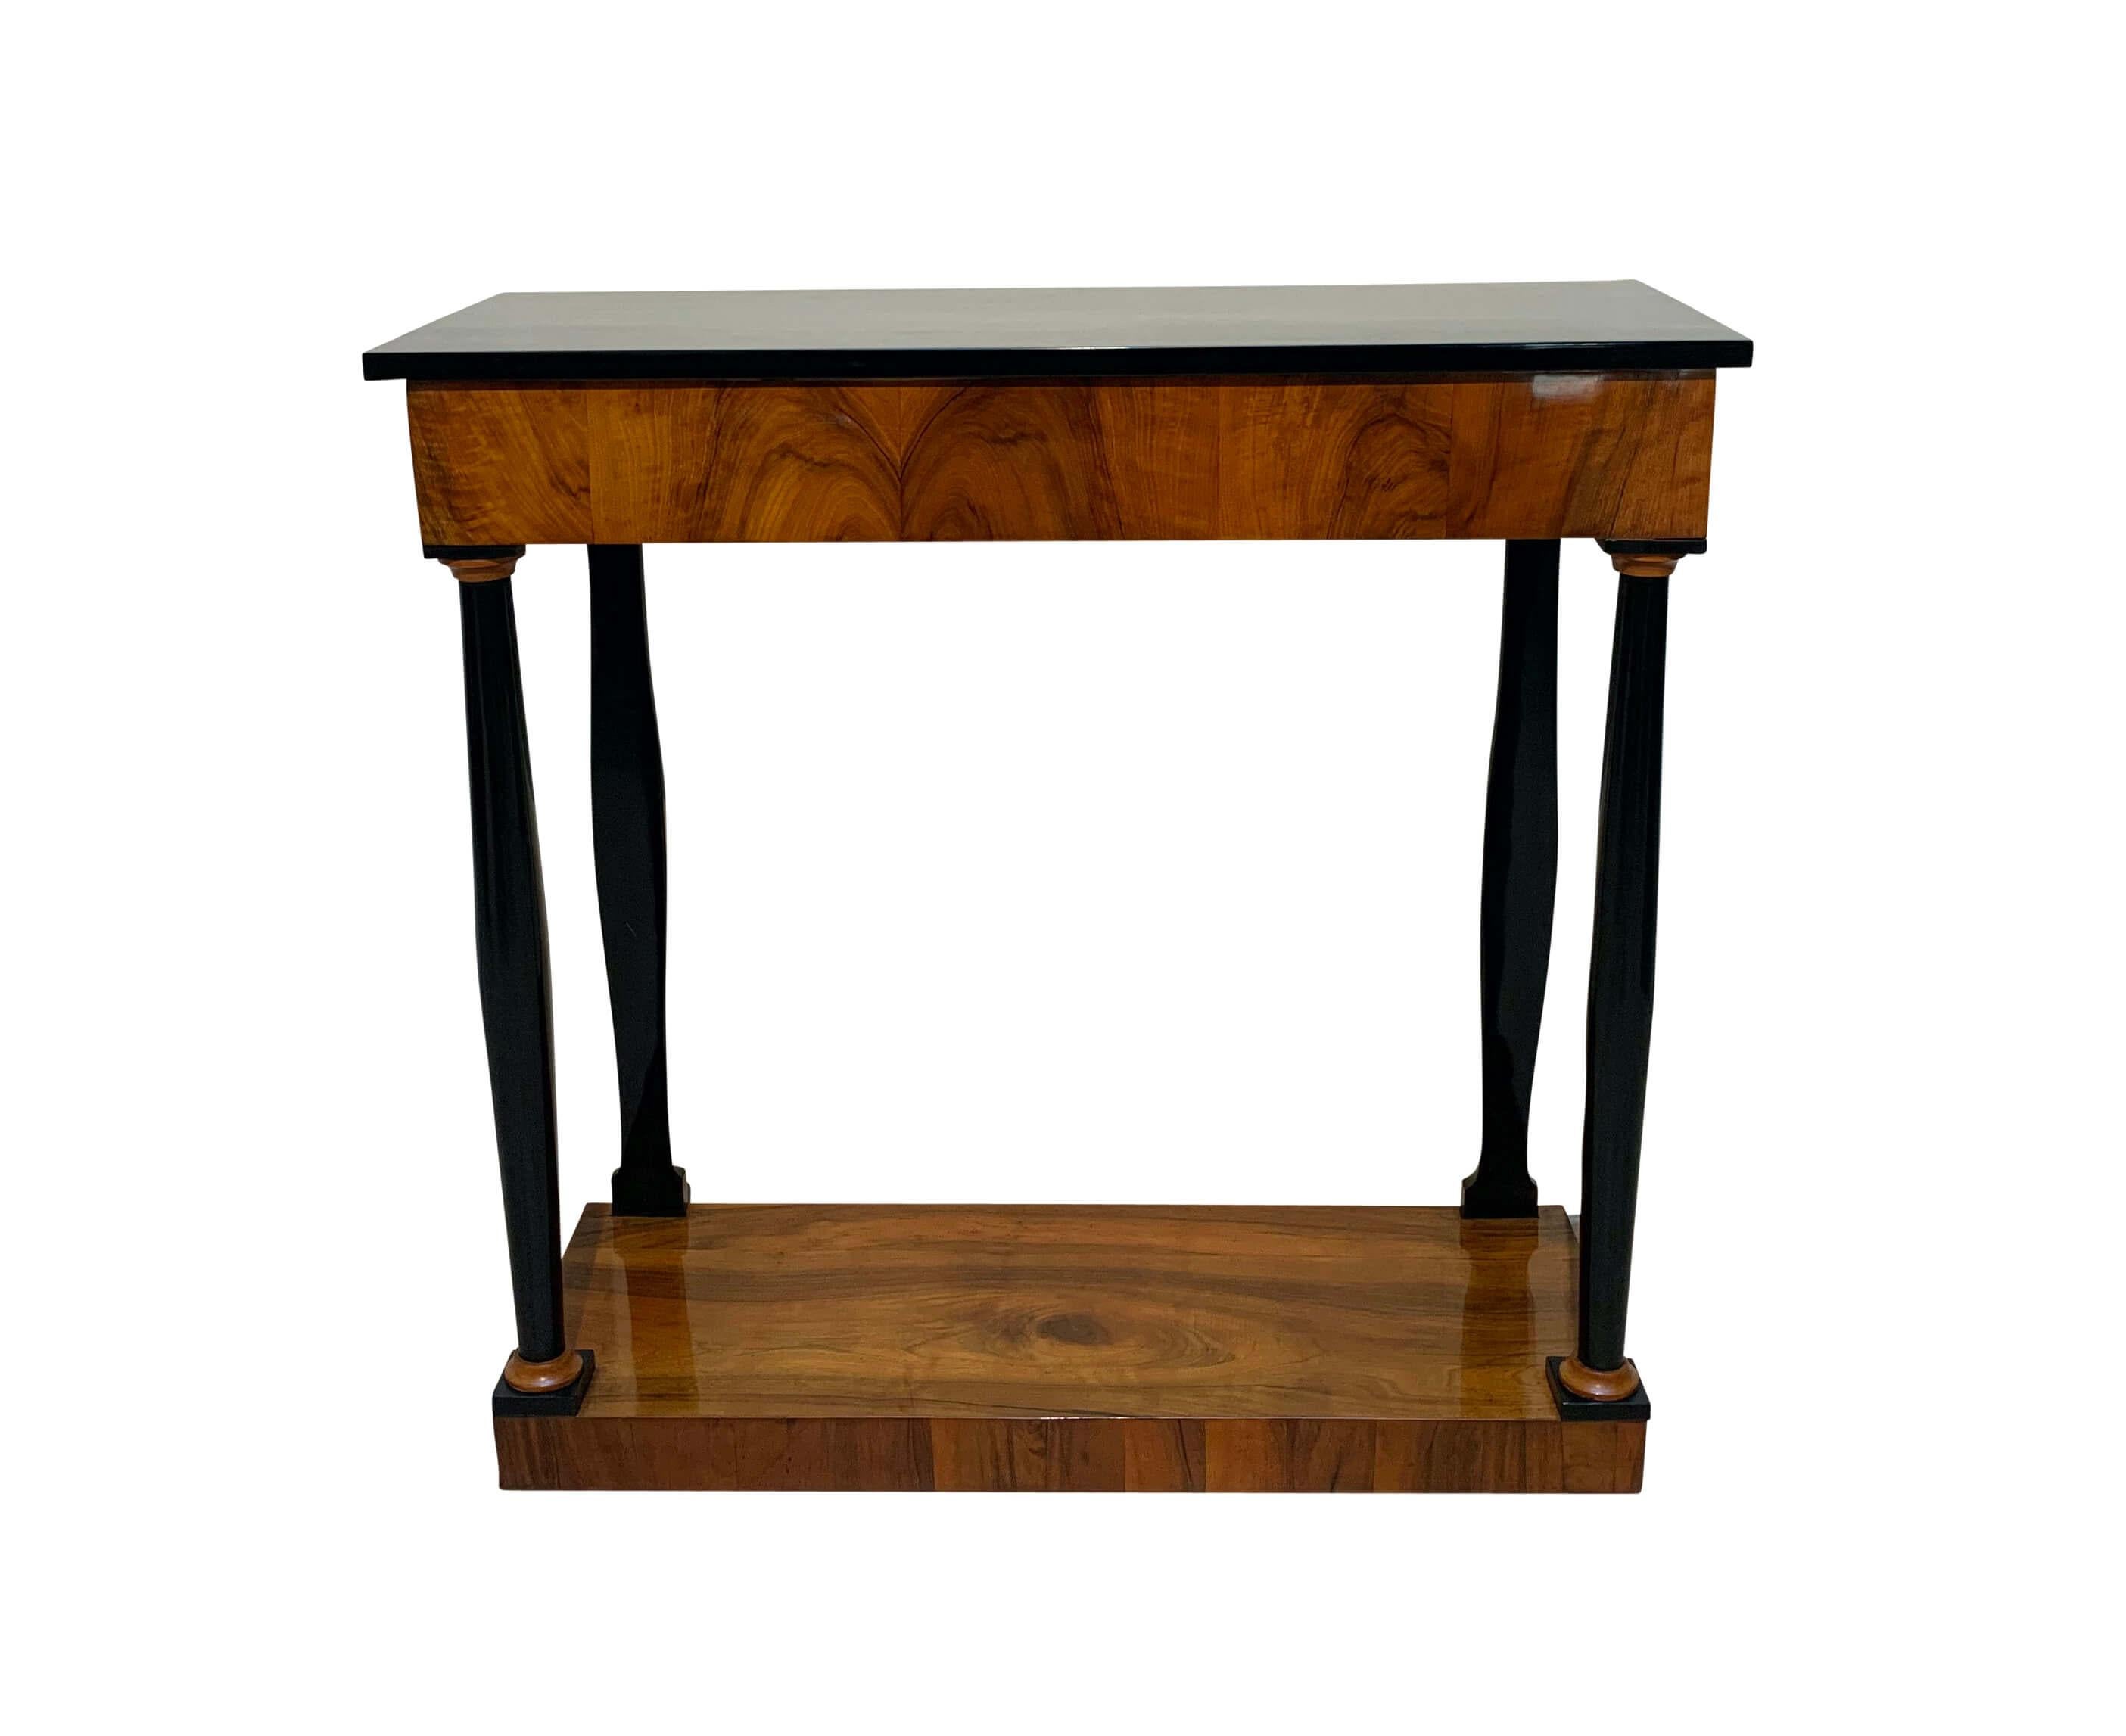 Beautiful straightlined neoclassical Biedermeier Console Table from South Germany, circa 1820.
Walnut veneered on softwood, shellac hand-polished (French Polish).
Ebonized plate and four plates.